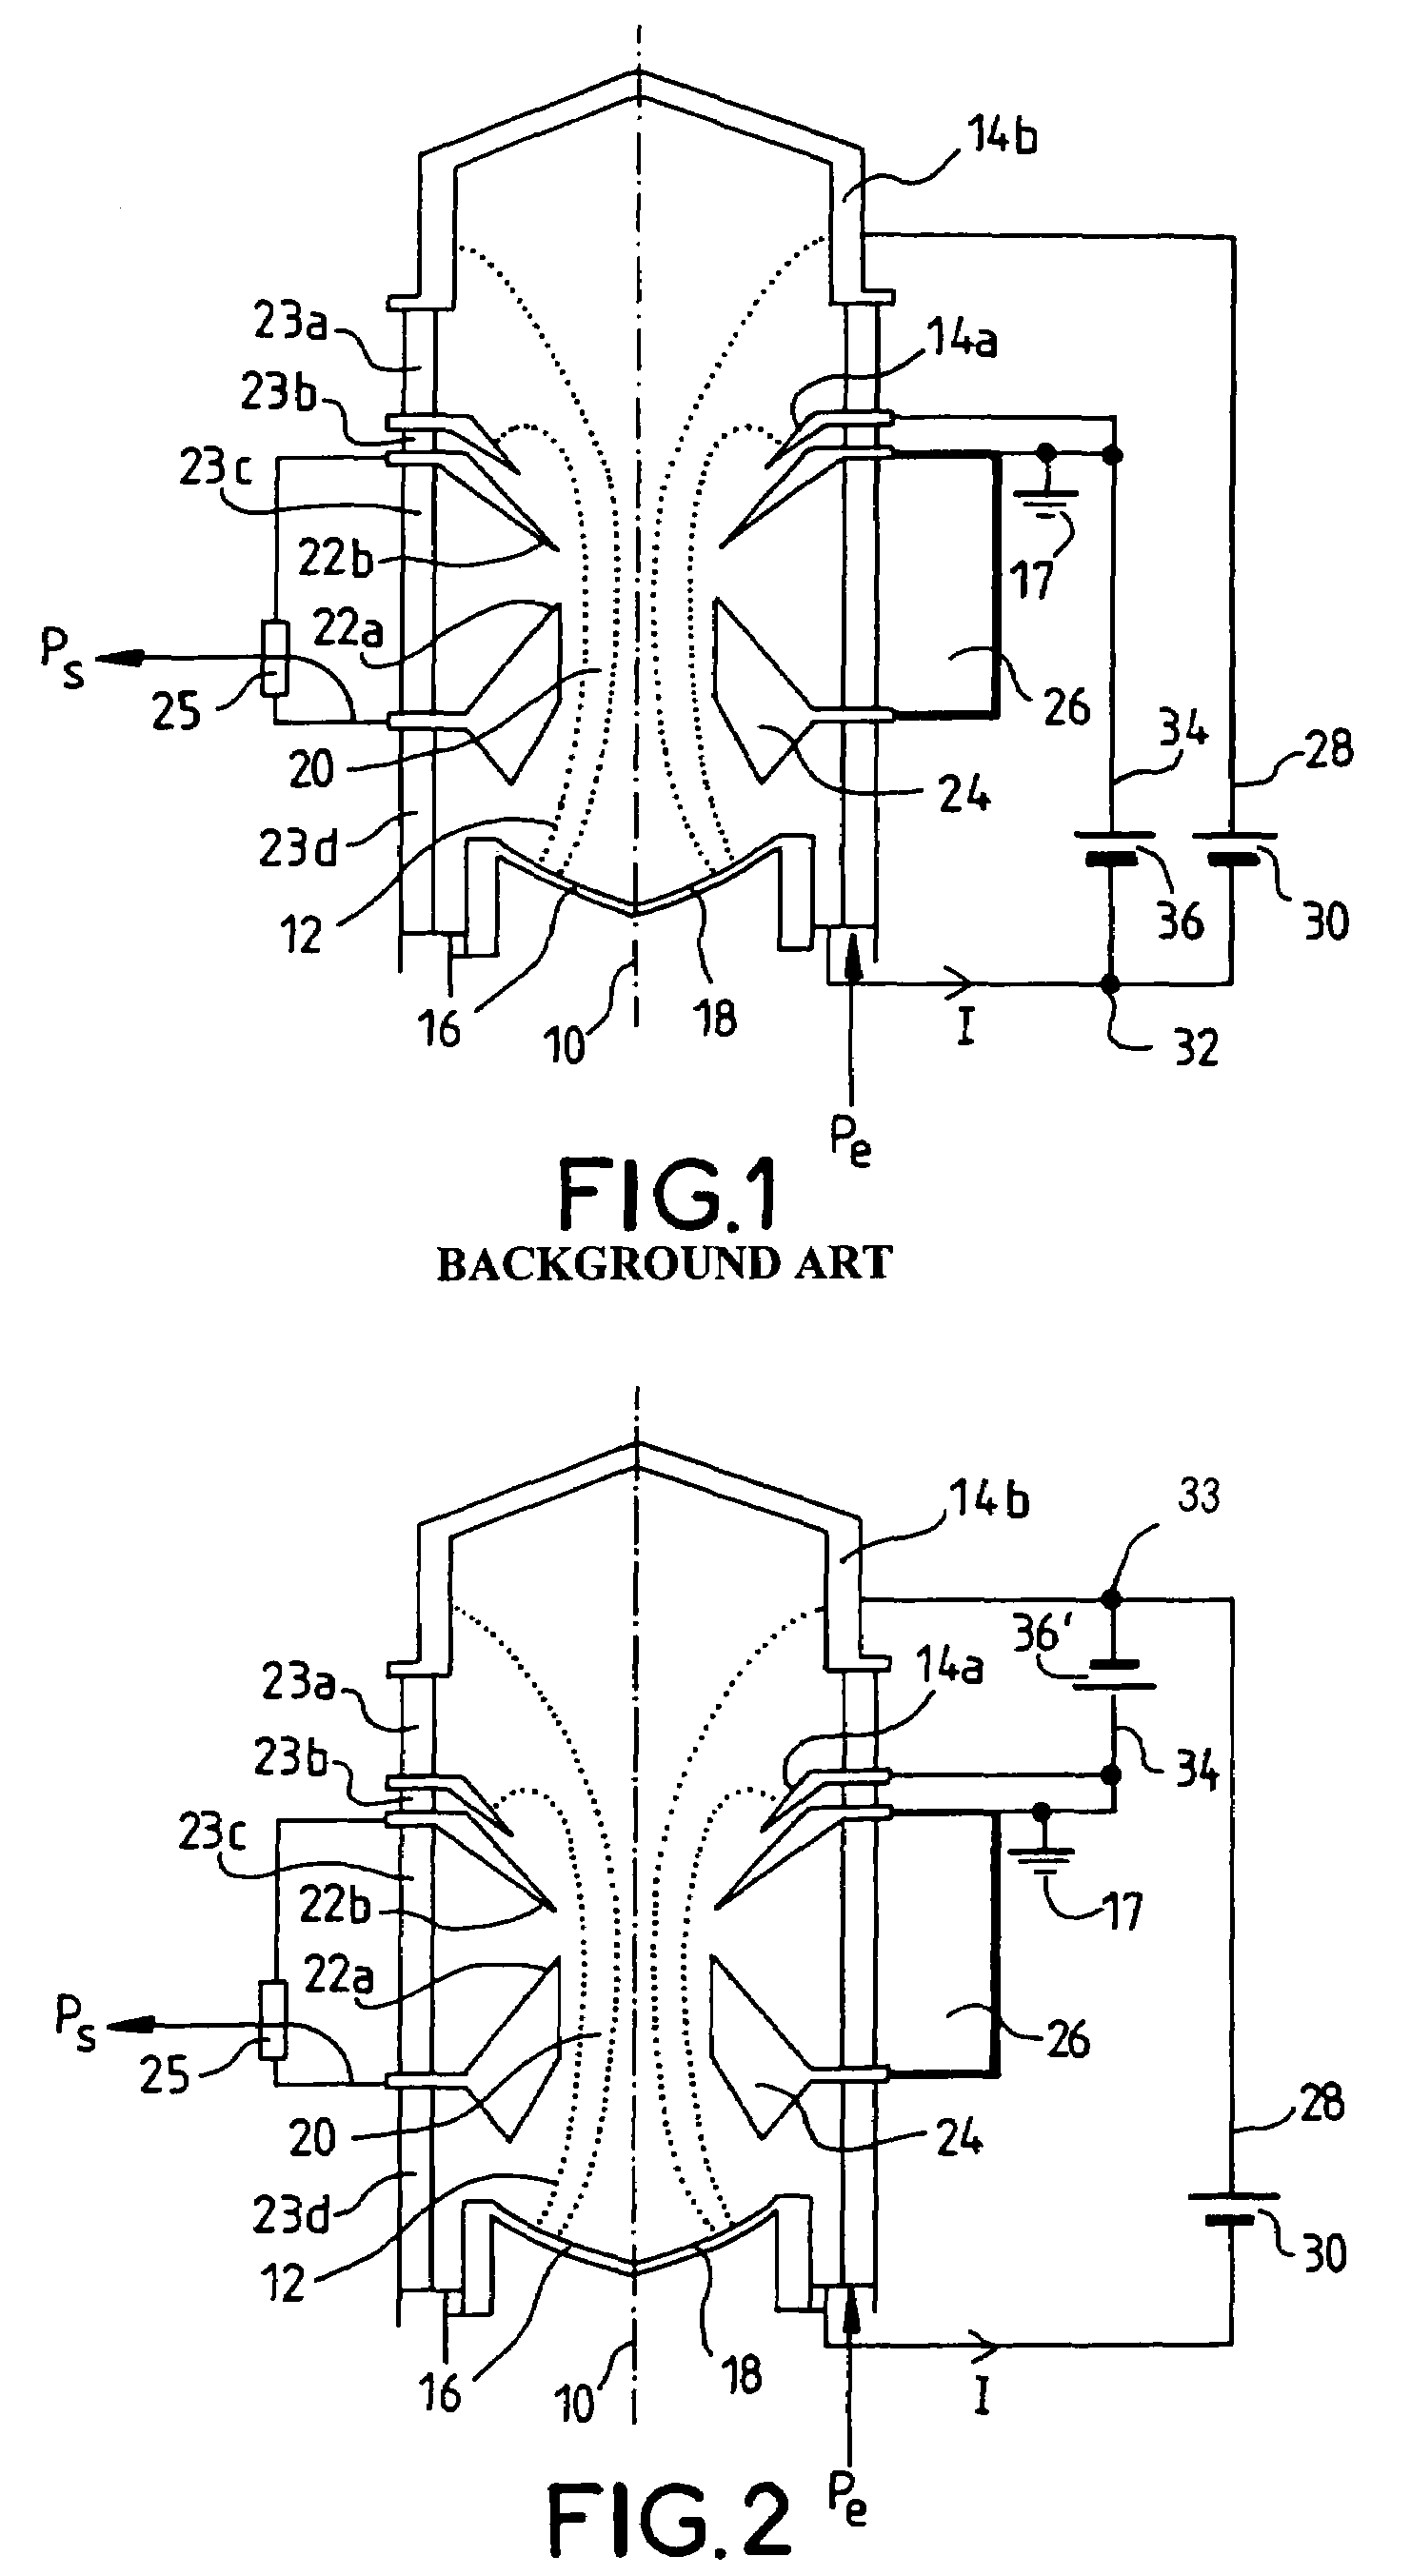 Amplifier comprising an electronic tube provided with collectors biased by at least two DC bias sources